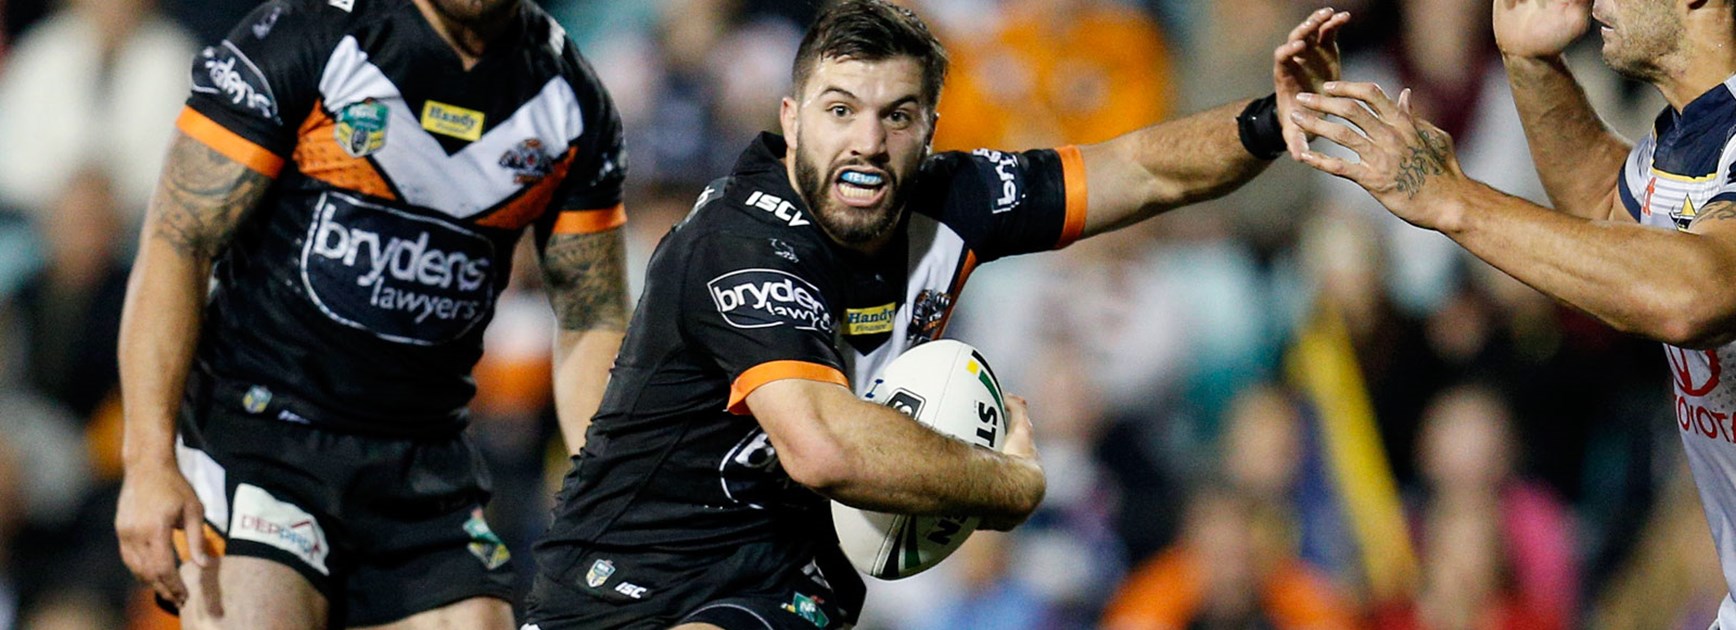 Wests Tigers fullback James Tedesco scored a great solo try against the Cowboys.